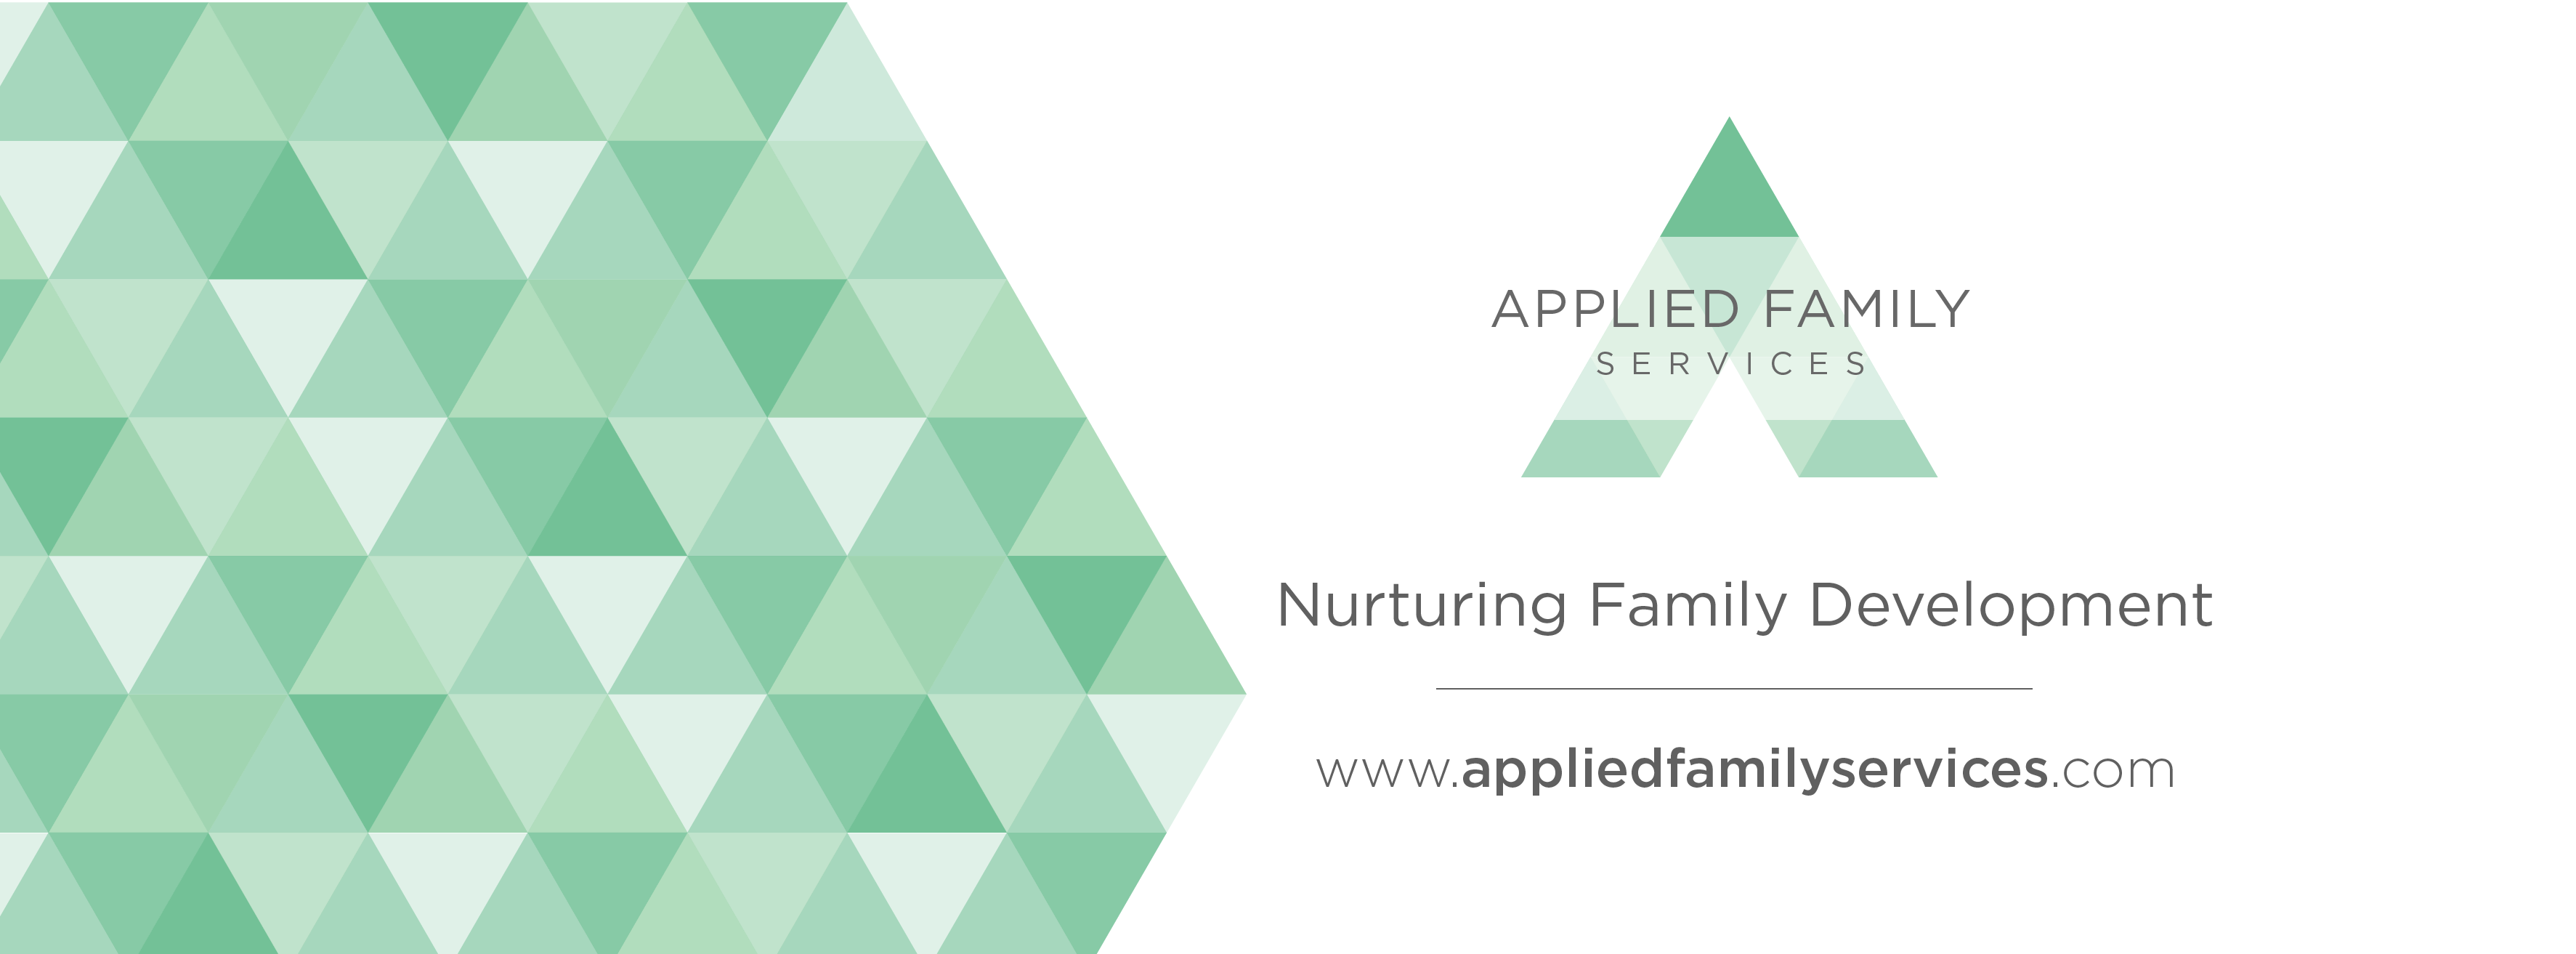 Applied Family Services - Nurturing Family Growth